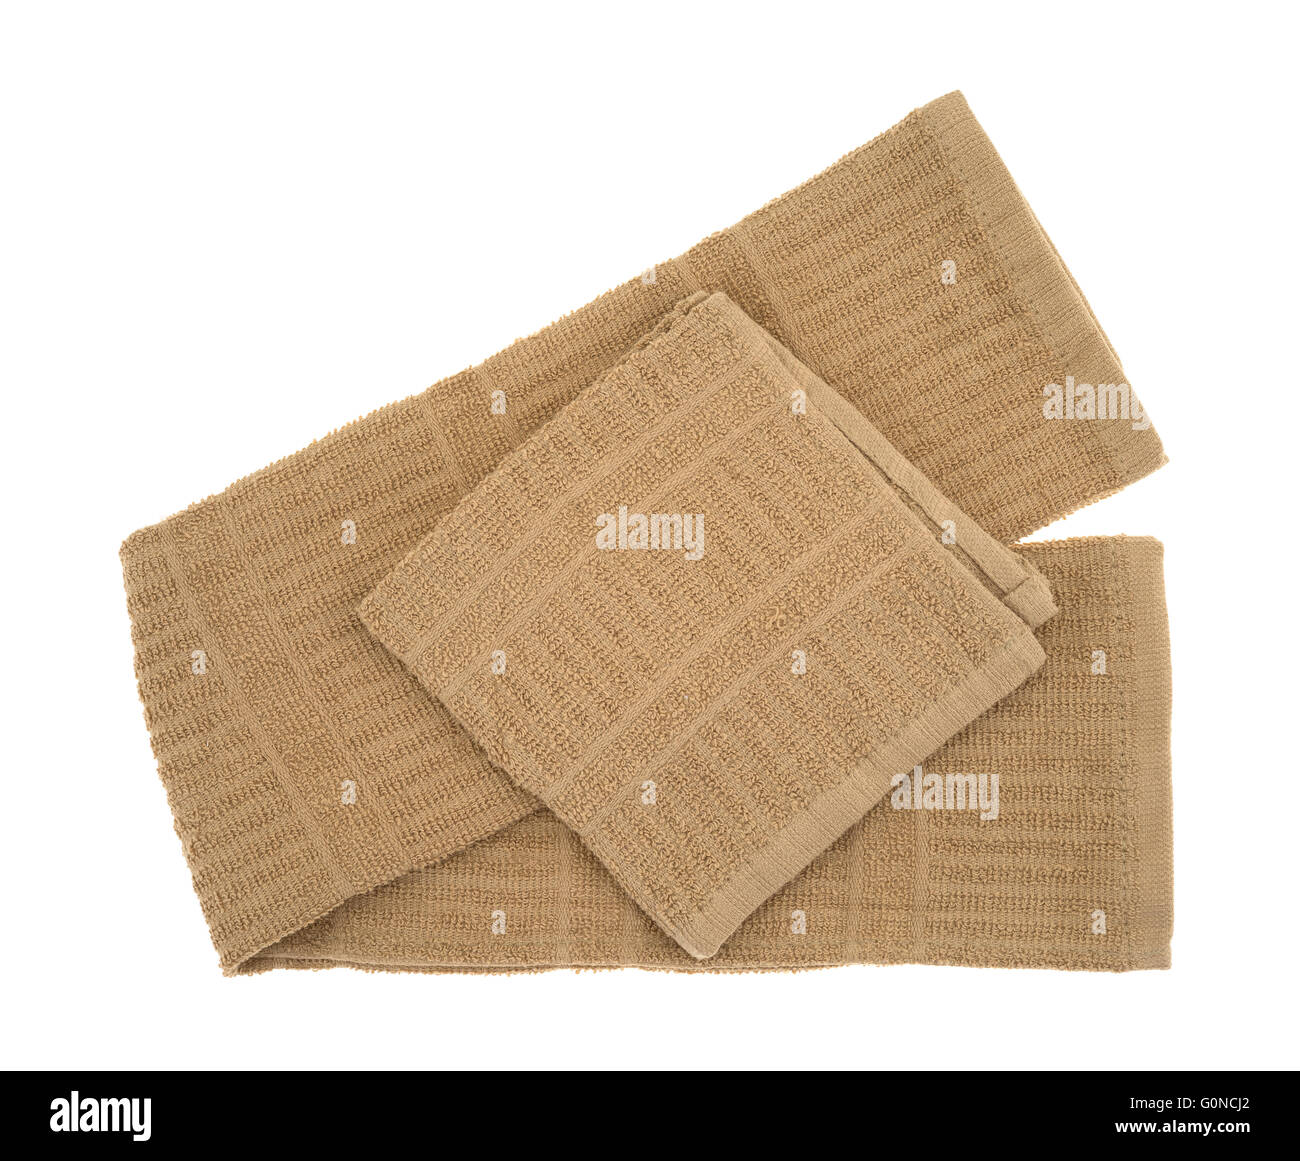 https://c8.alamy.com/comp/G0NCJ2/top-view-of-a-kitchen-dish-cloth-plus-a-towel-isolated-on-a-white-G0NCJ2.jpg